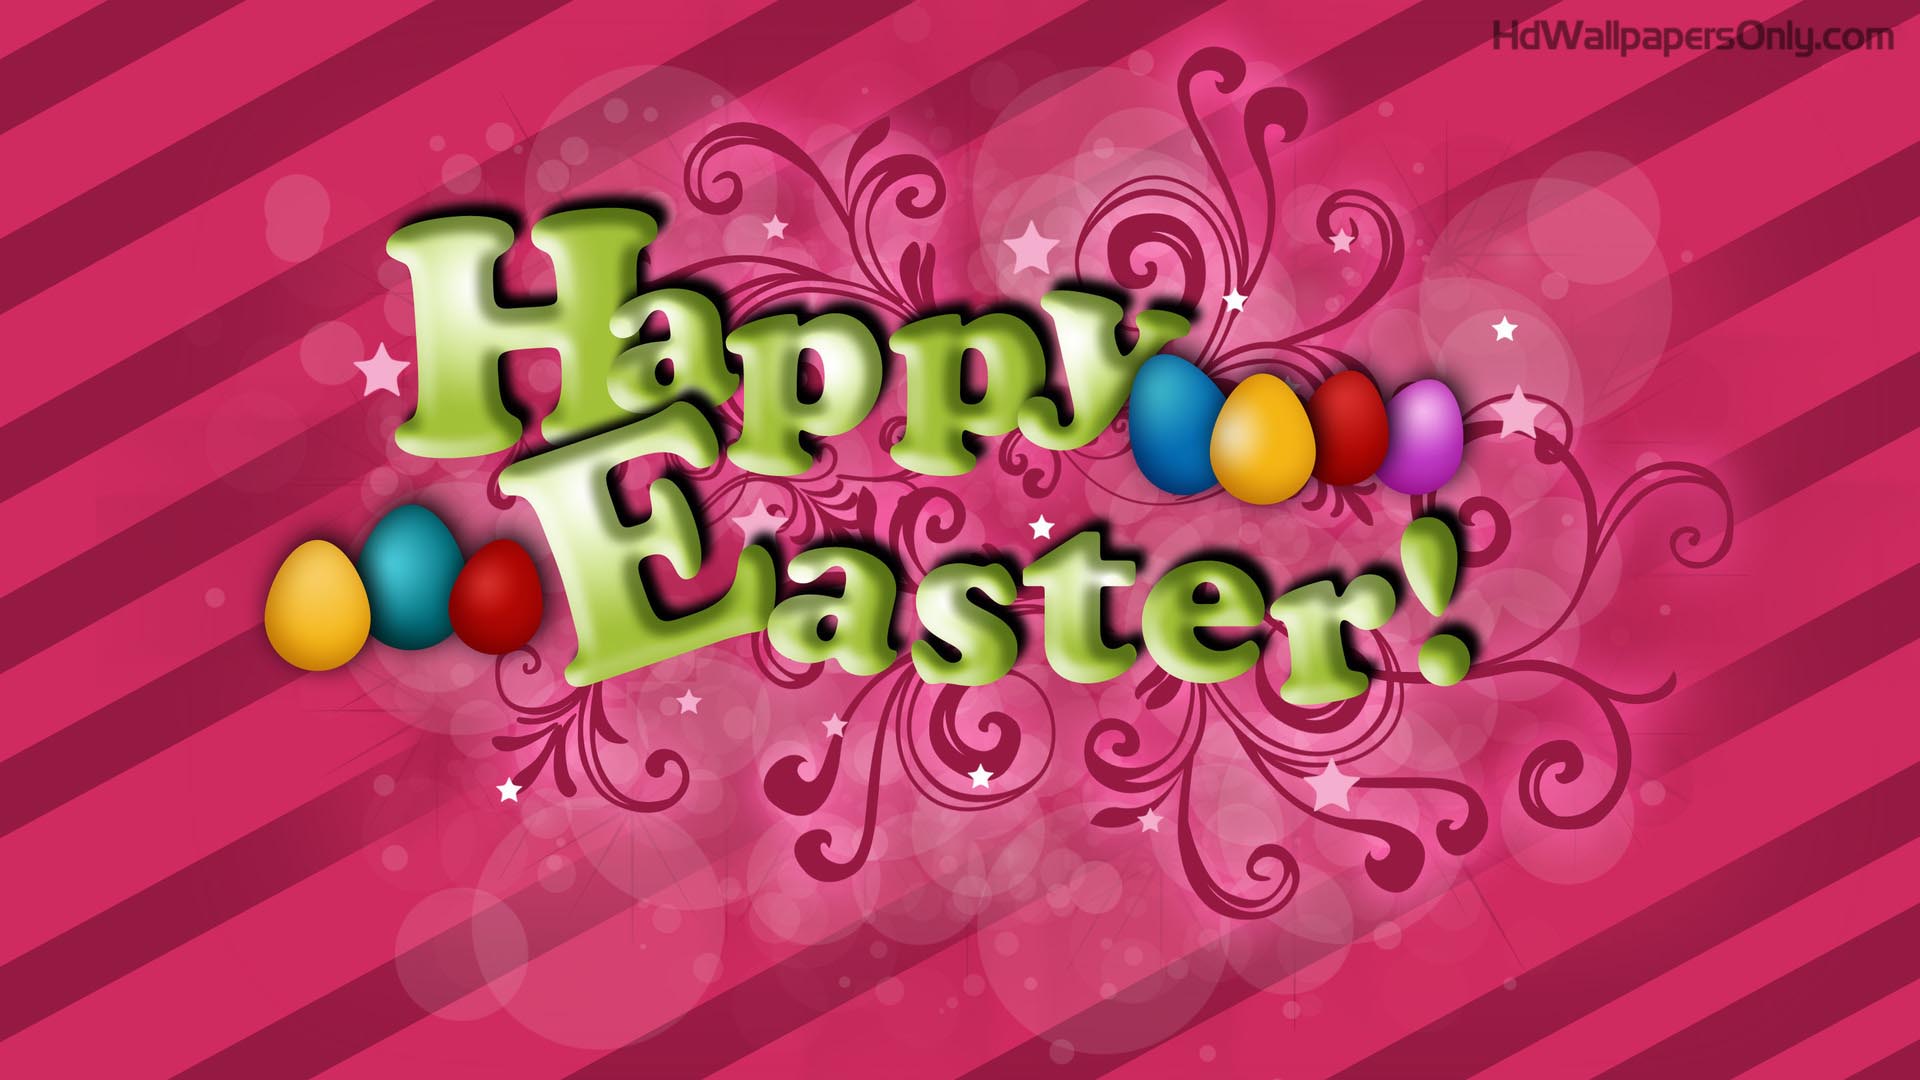  Easter Wallpapers Hd Qualityhd Wallpapers Only   Happy Easter 1920x1080